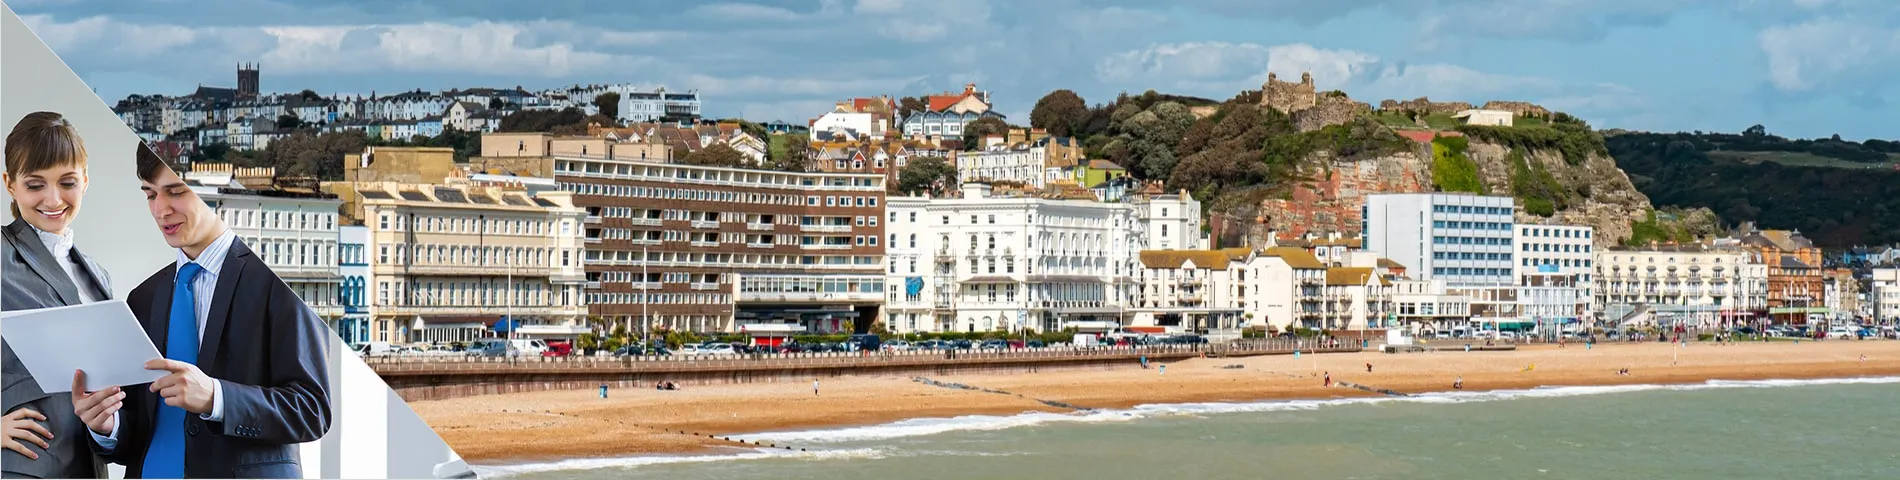 Hastings - Business Individuale